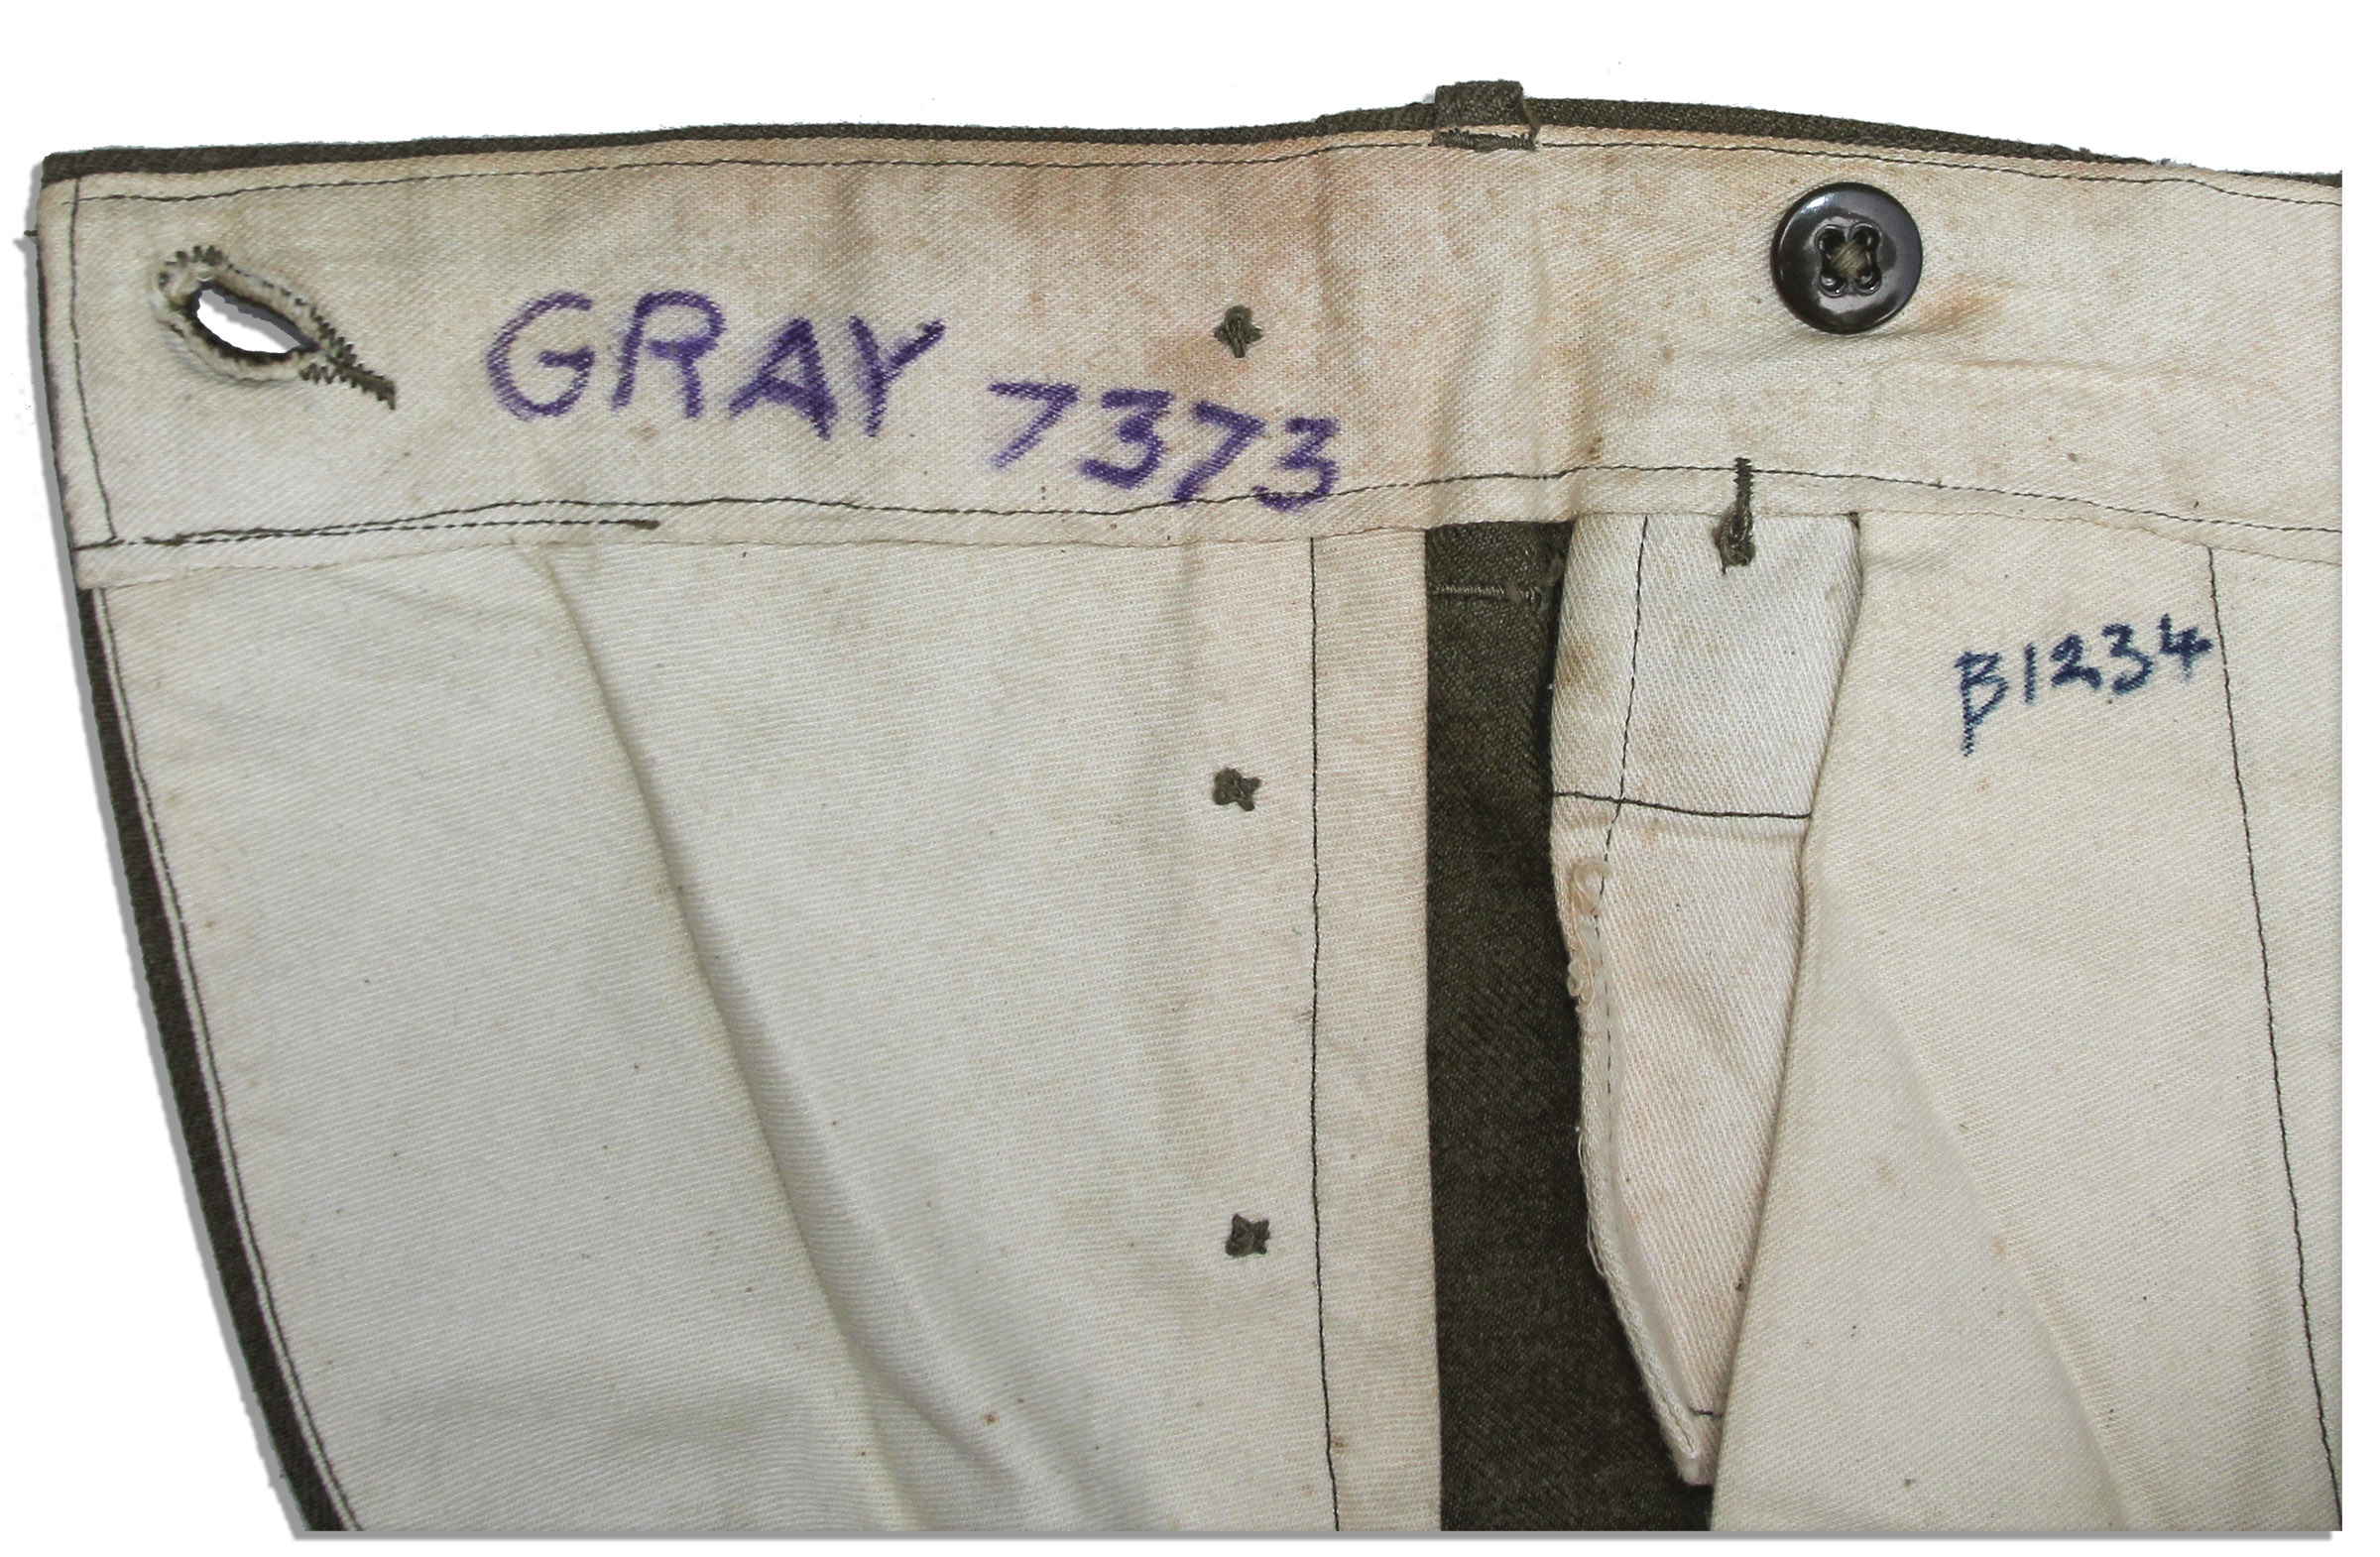 World War I & II Unique Collection of World War II Items Including a Full Uniform Worn by a Corporal - Image 2 of 9